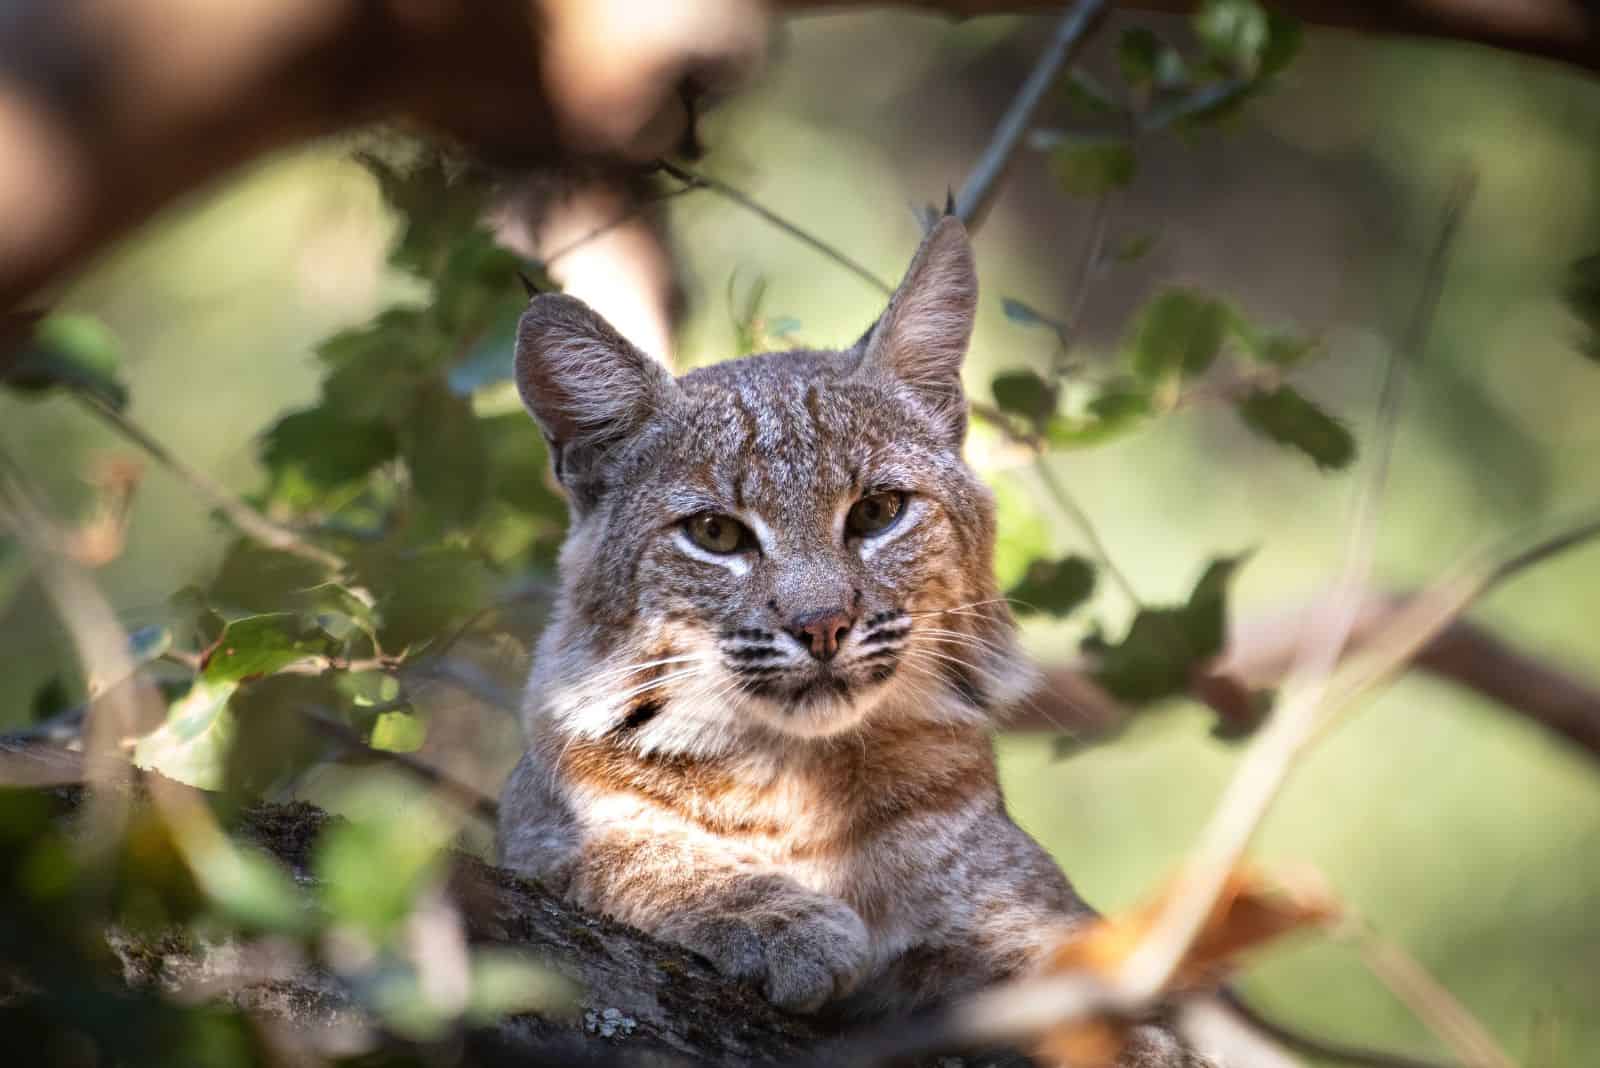 Bobcat leaning against a tree